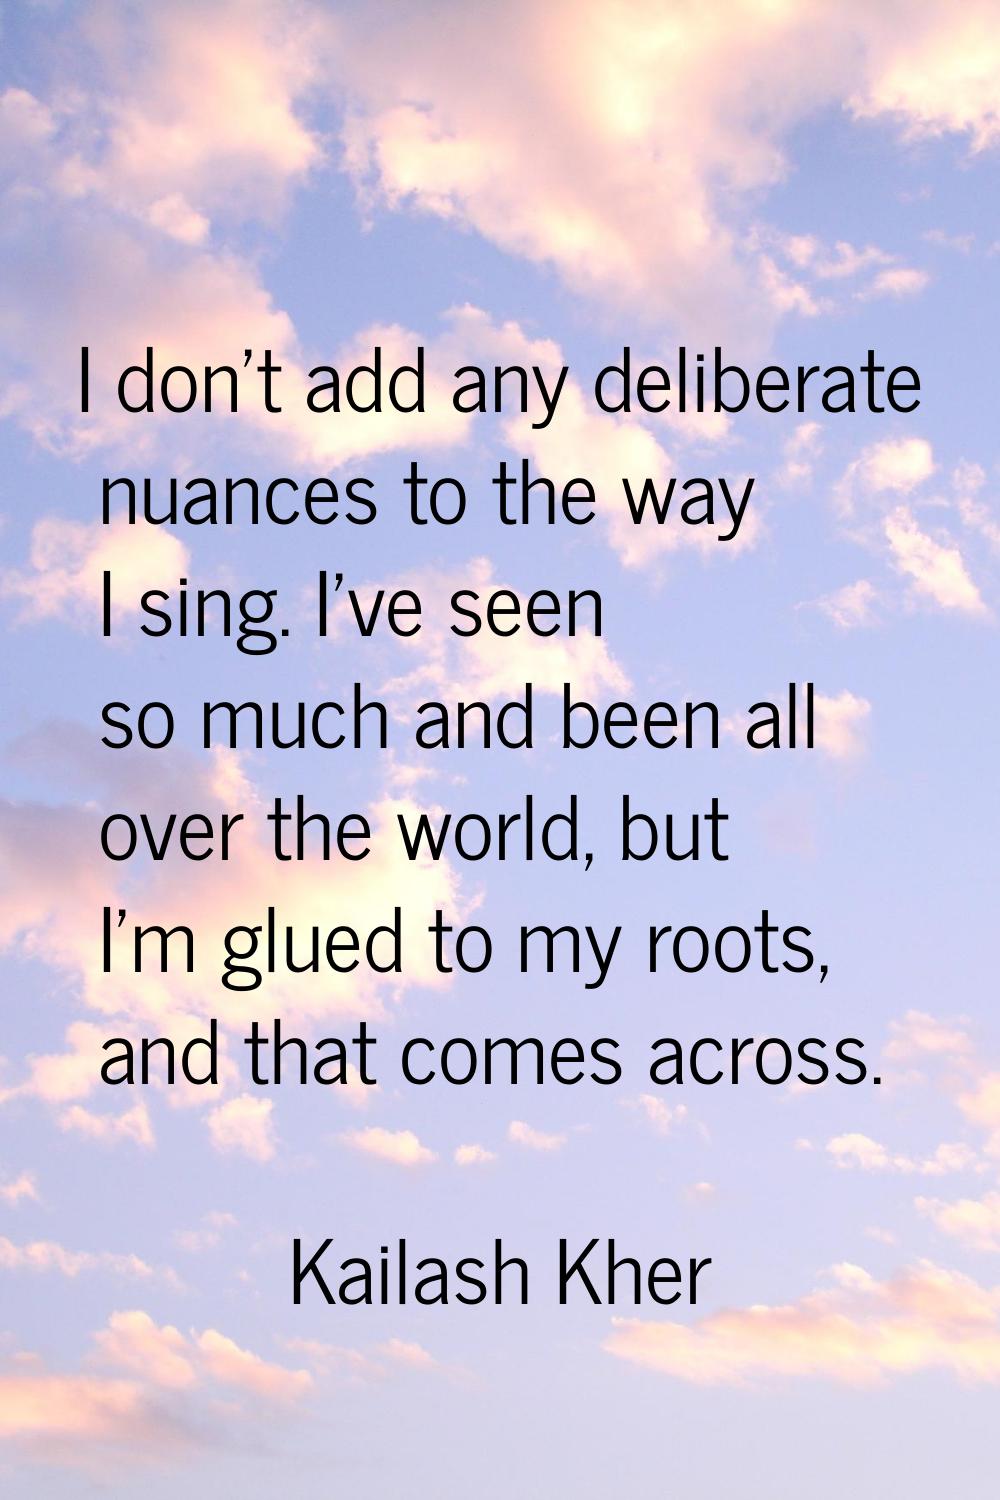 I don't add any deliberate nuances to the way I sing. I've seen so much and been all over the world